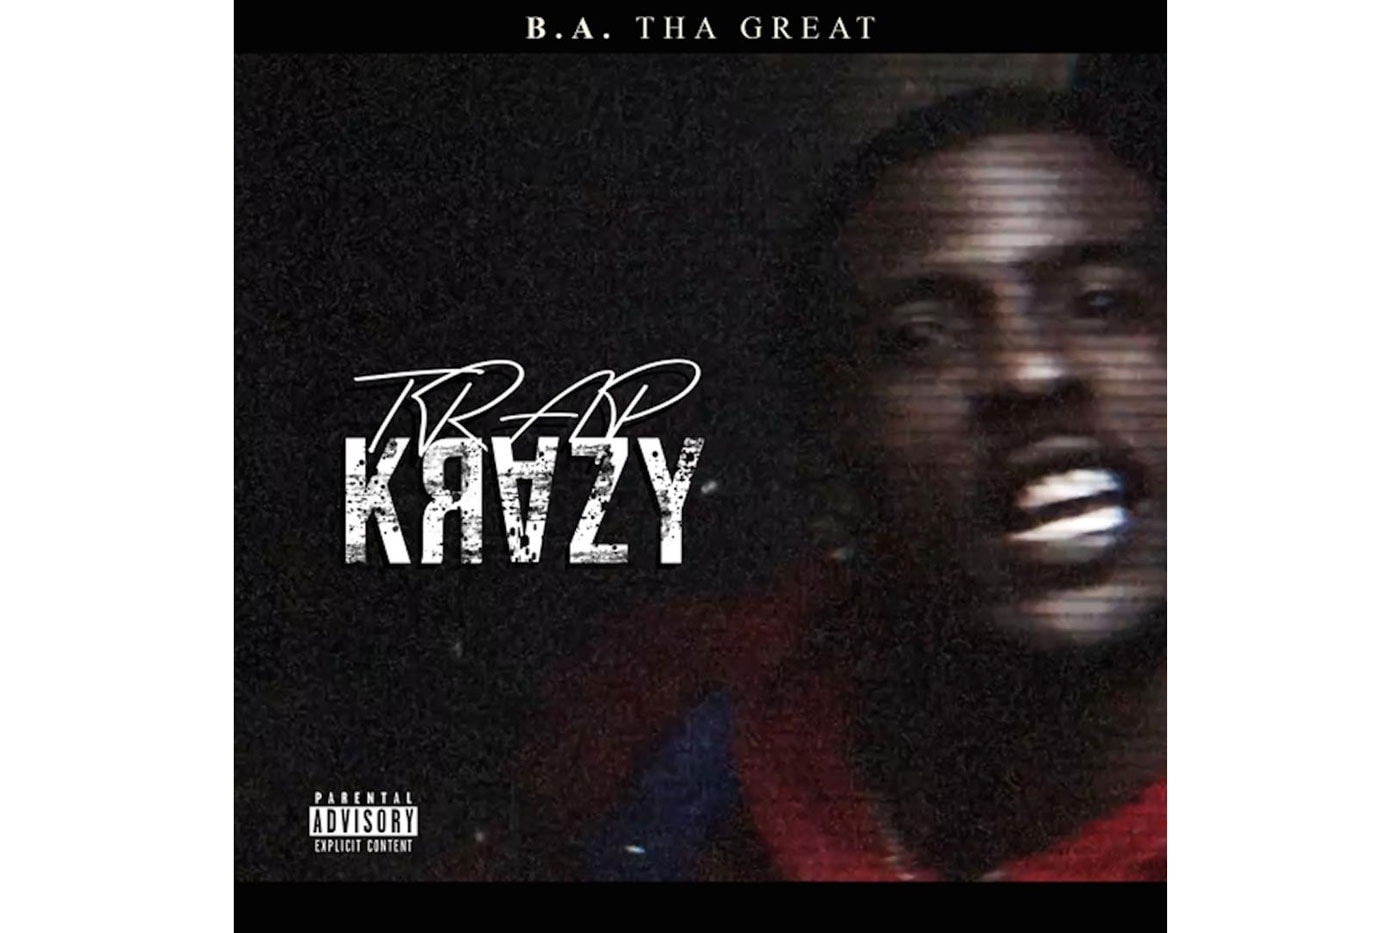 B.A. The Great Trap Krazy Cross Town Mike WiLL Made-It New music Atlanta